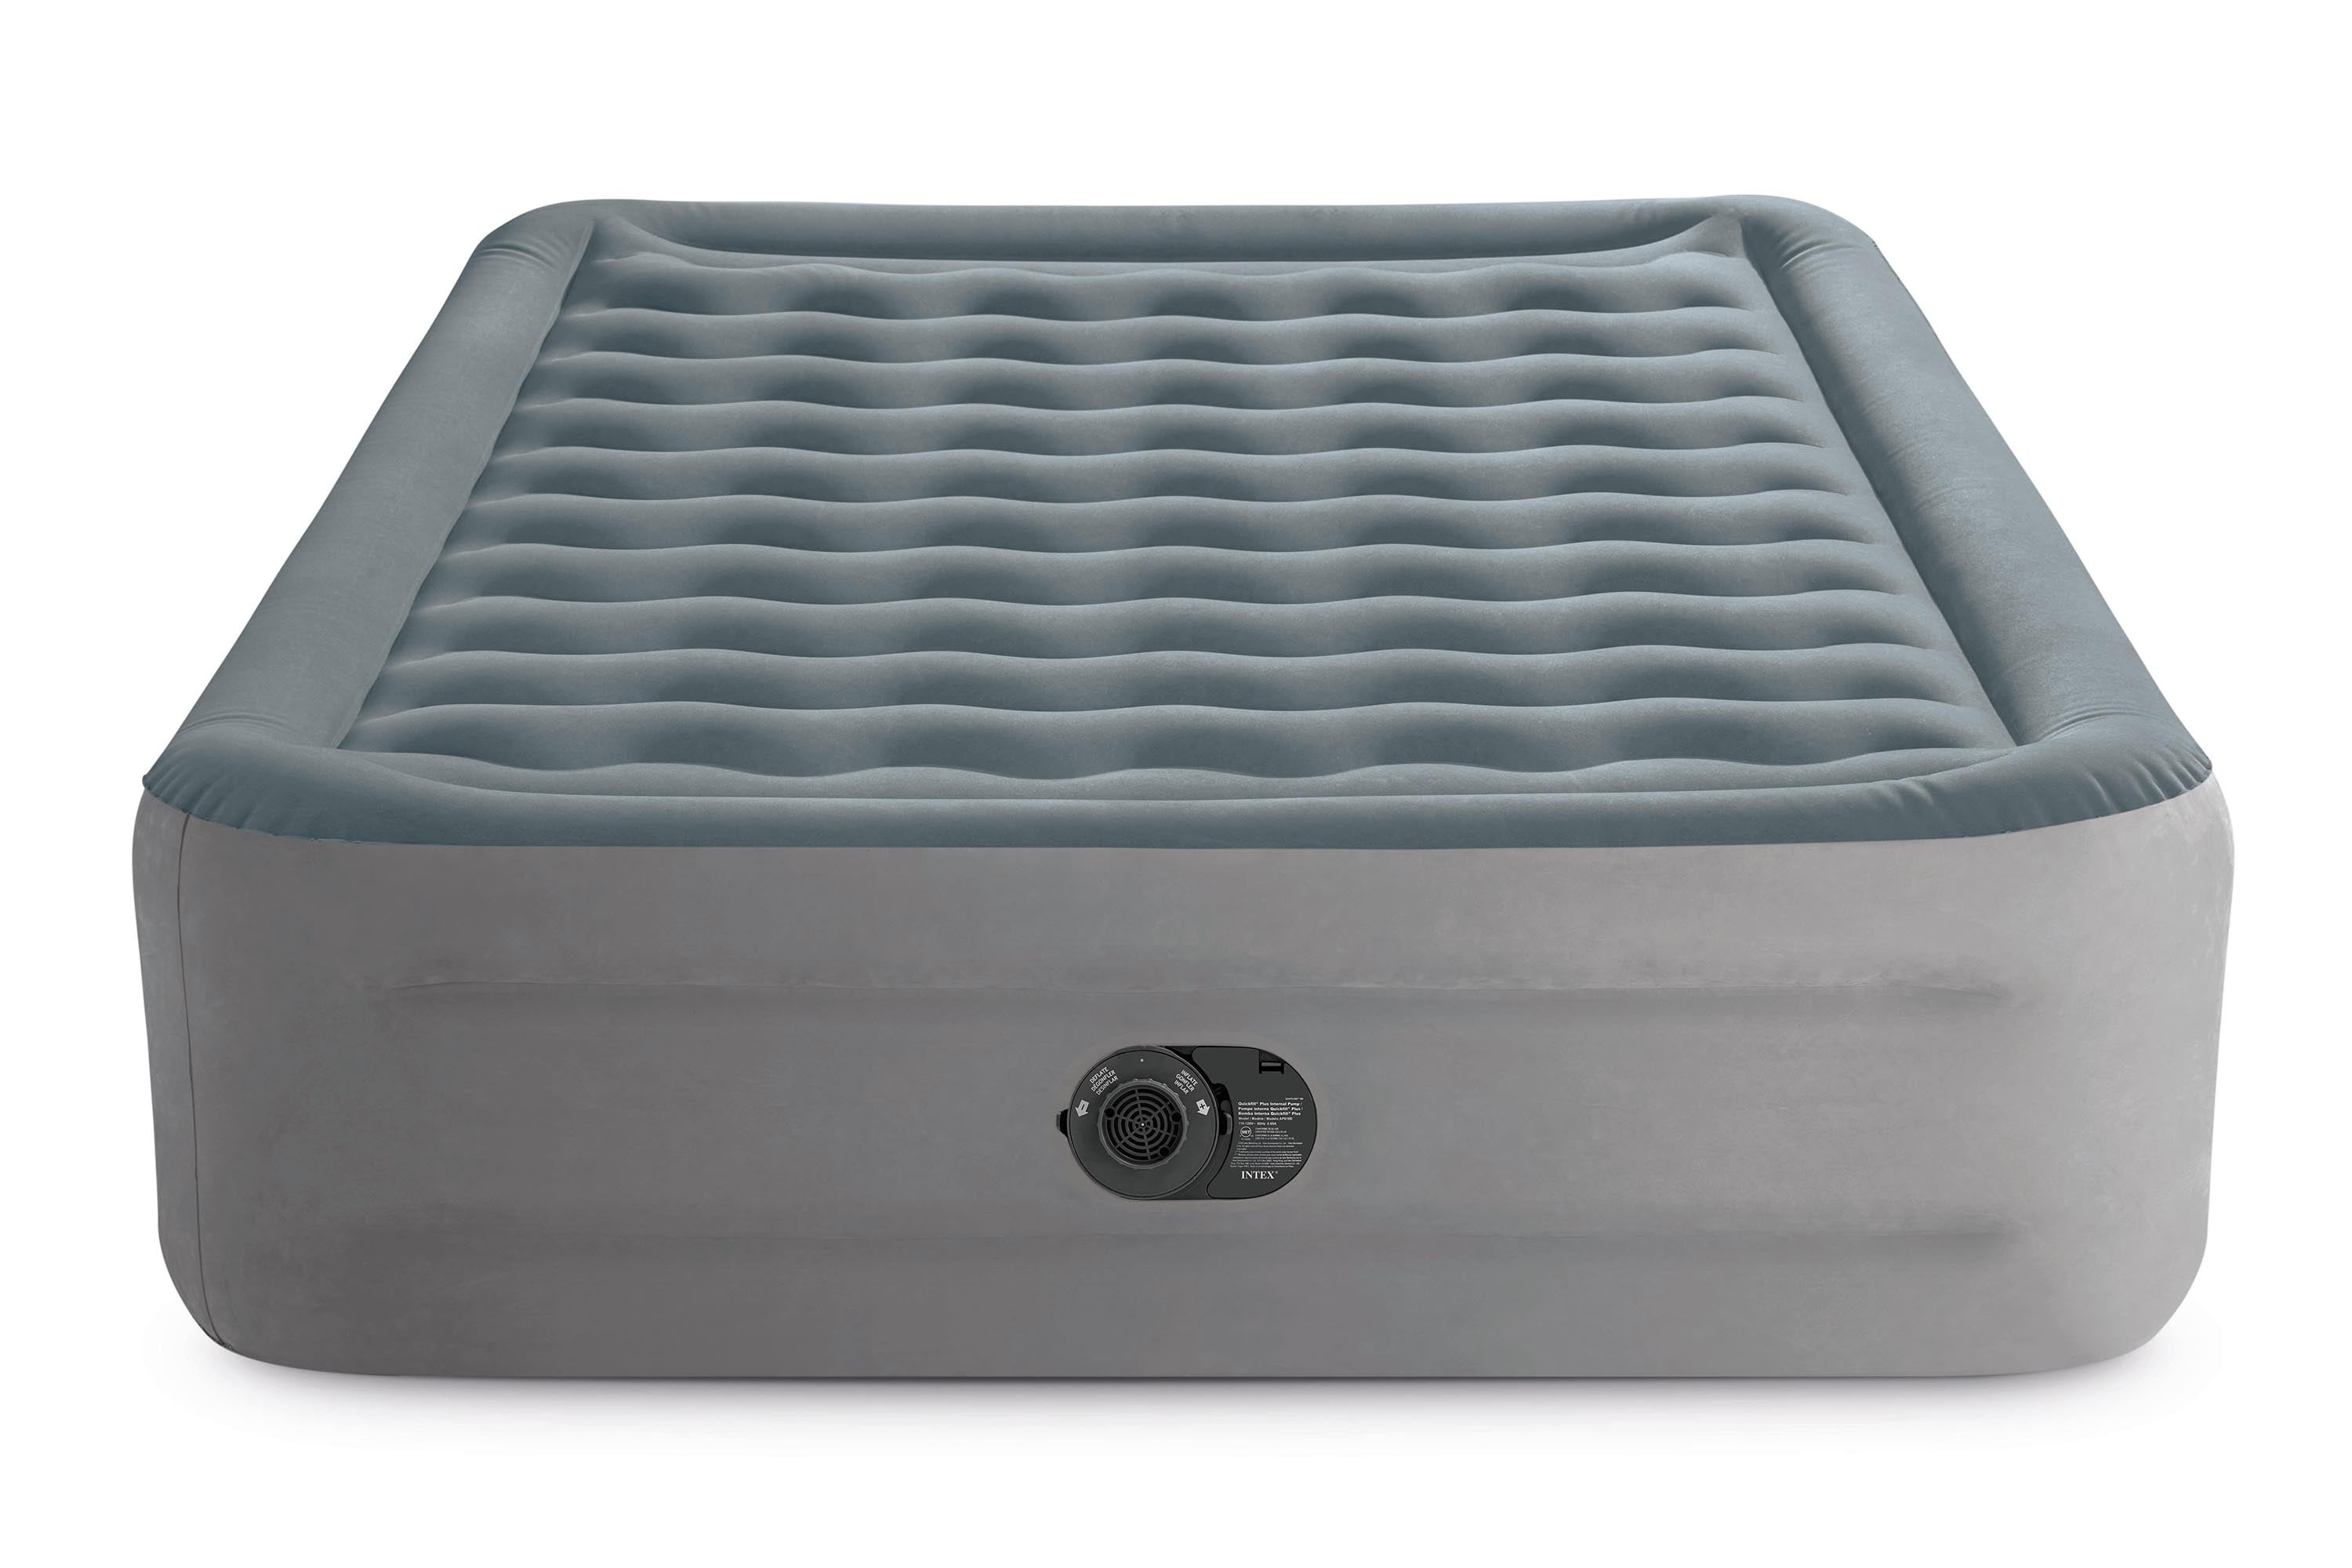 Intex Queen Raised Air Mattress Bed with Built-In Electric Pump Quilted Cover 